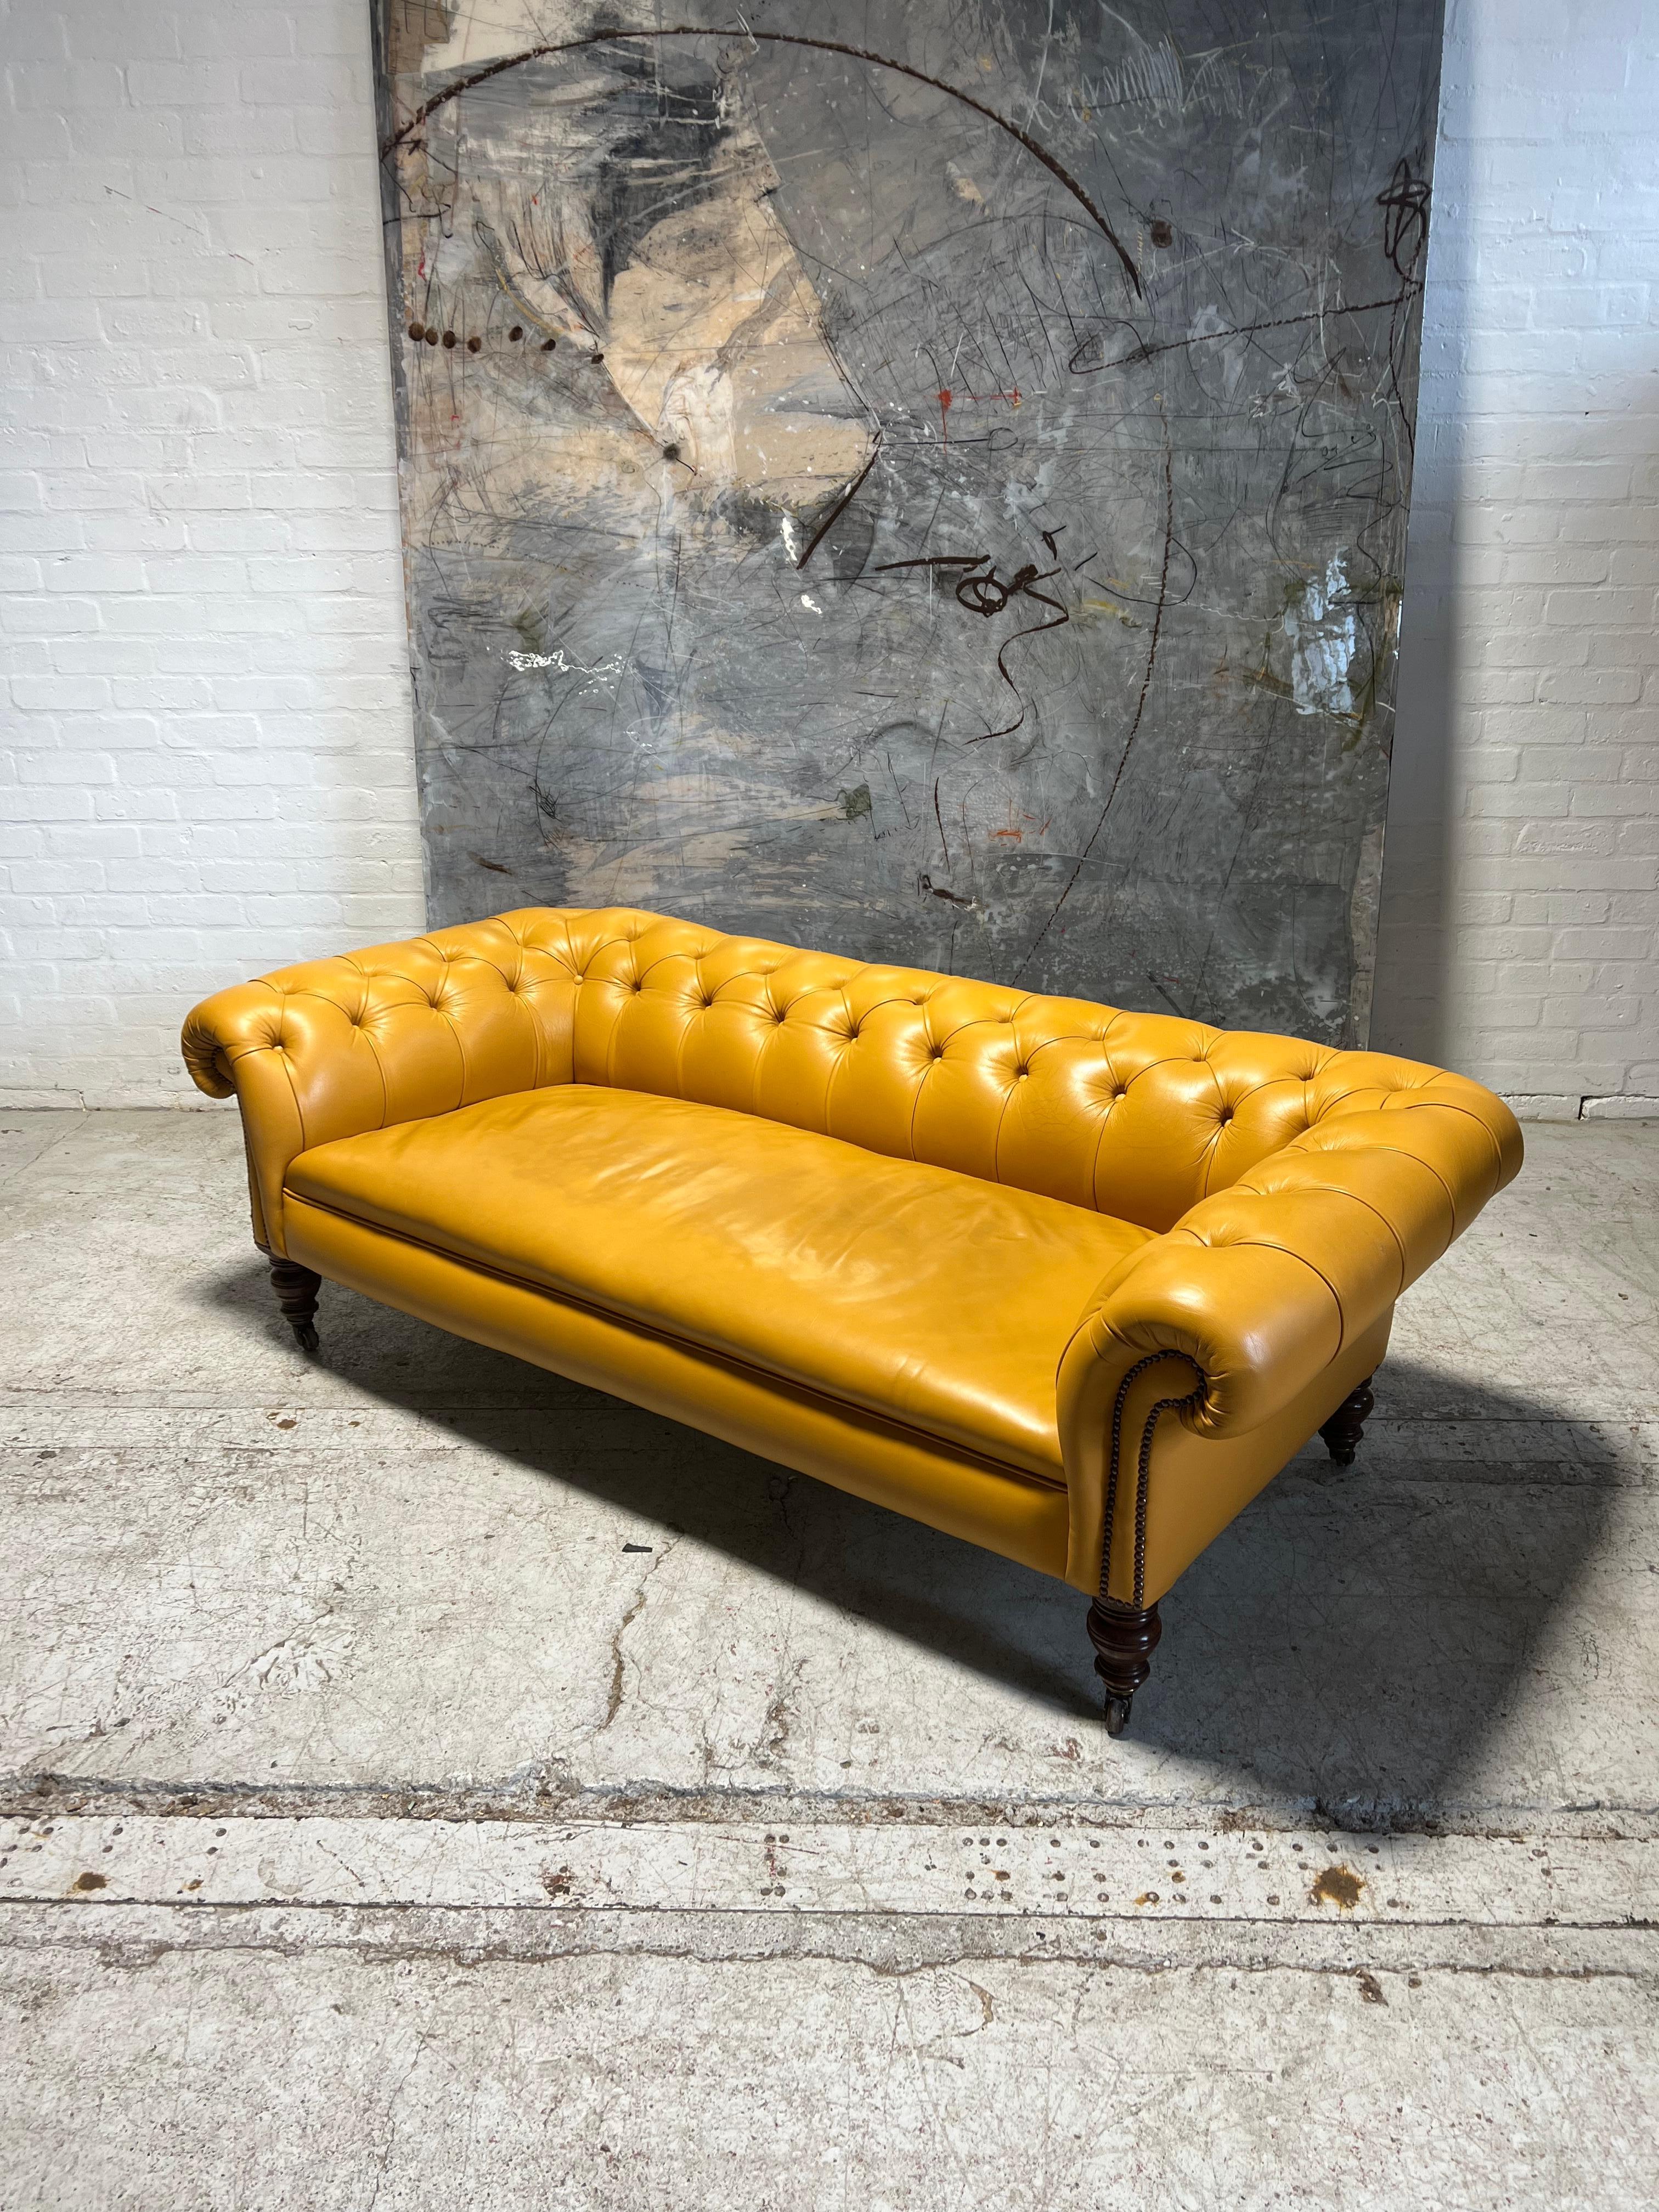 Antique 19thC Chesterfield Sofa in Stunning Sunflower Yellow Leather For Sale 3